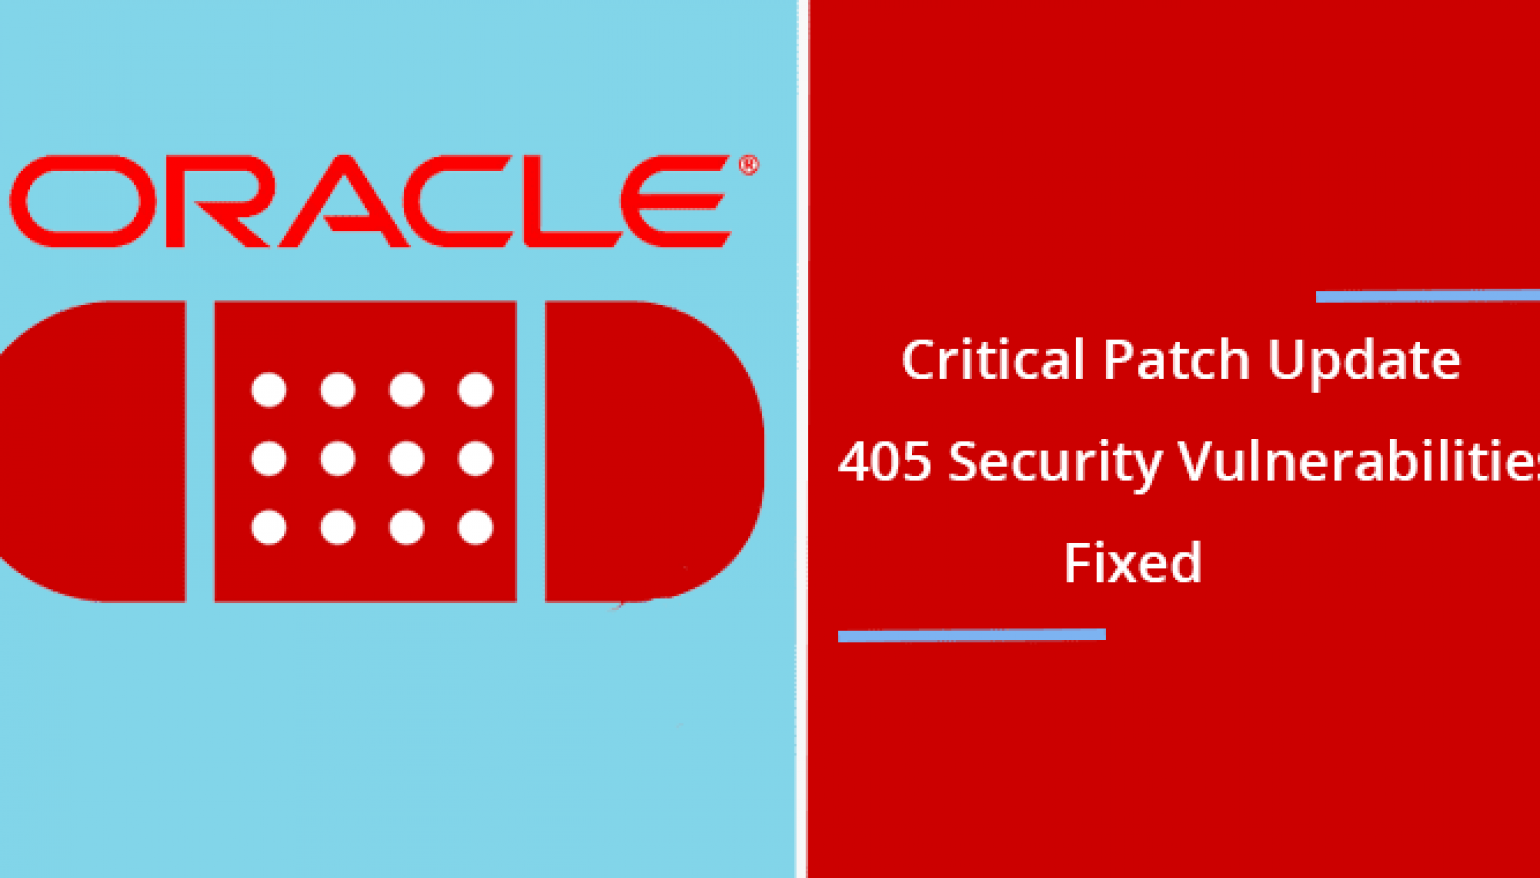 Oracle Critical Patch Update Addresses 405 New Security Vulnerabilities